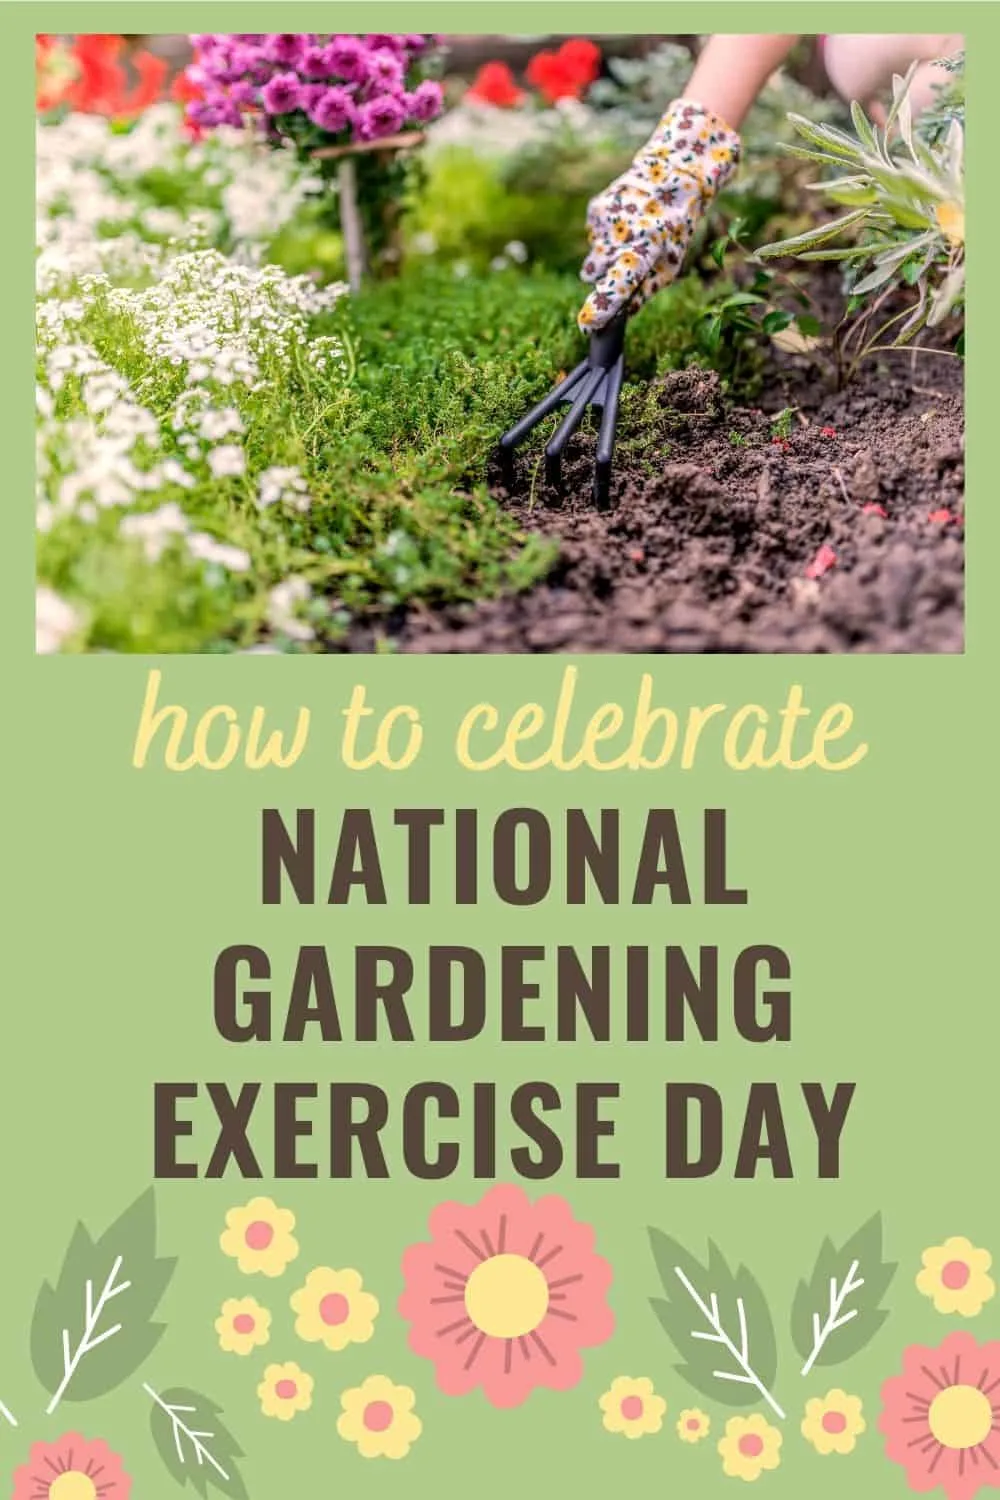 How to celebrate national gardening exercise day